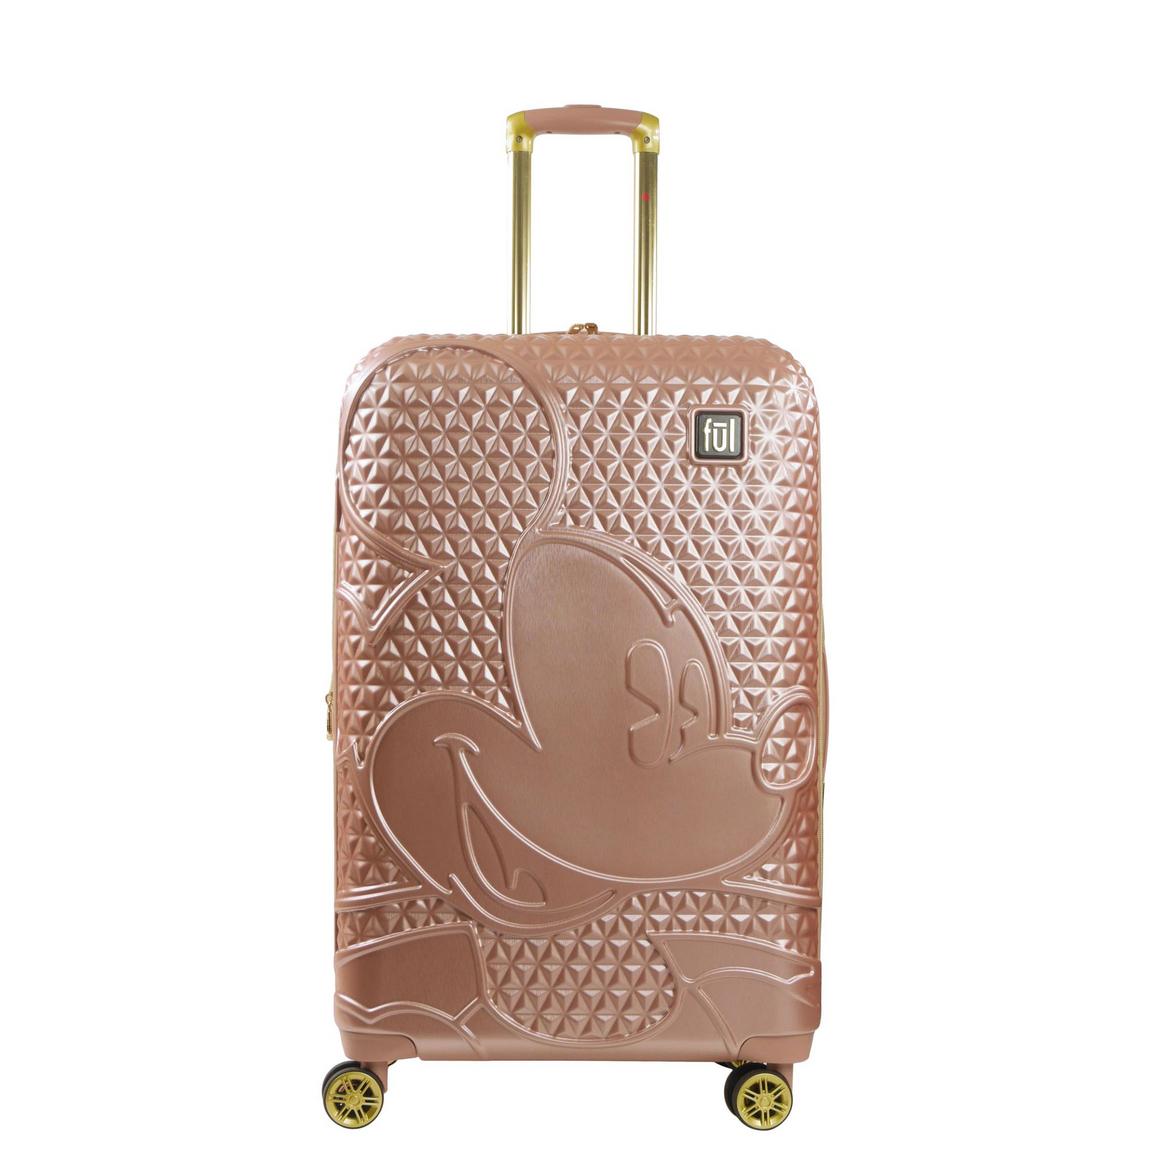 Concept One FUL Disney Textured Mickey Mouse 30 inch Hard Sided Rolling Luggage - Rose Gold, Rosegold